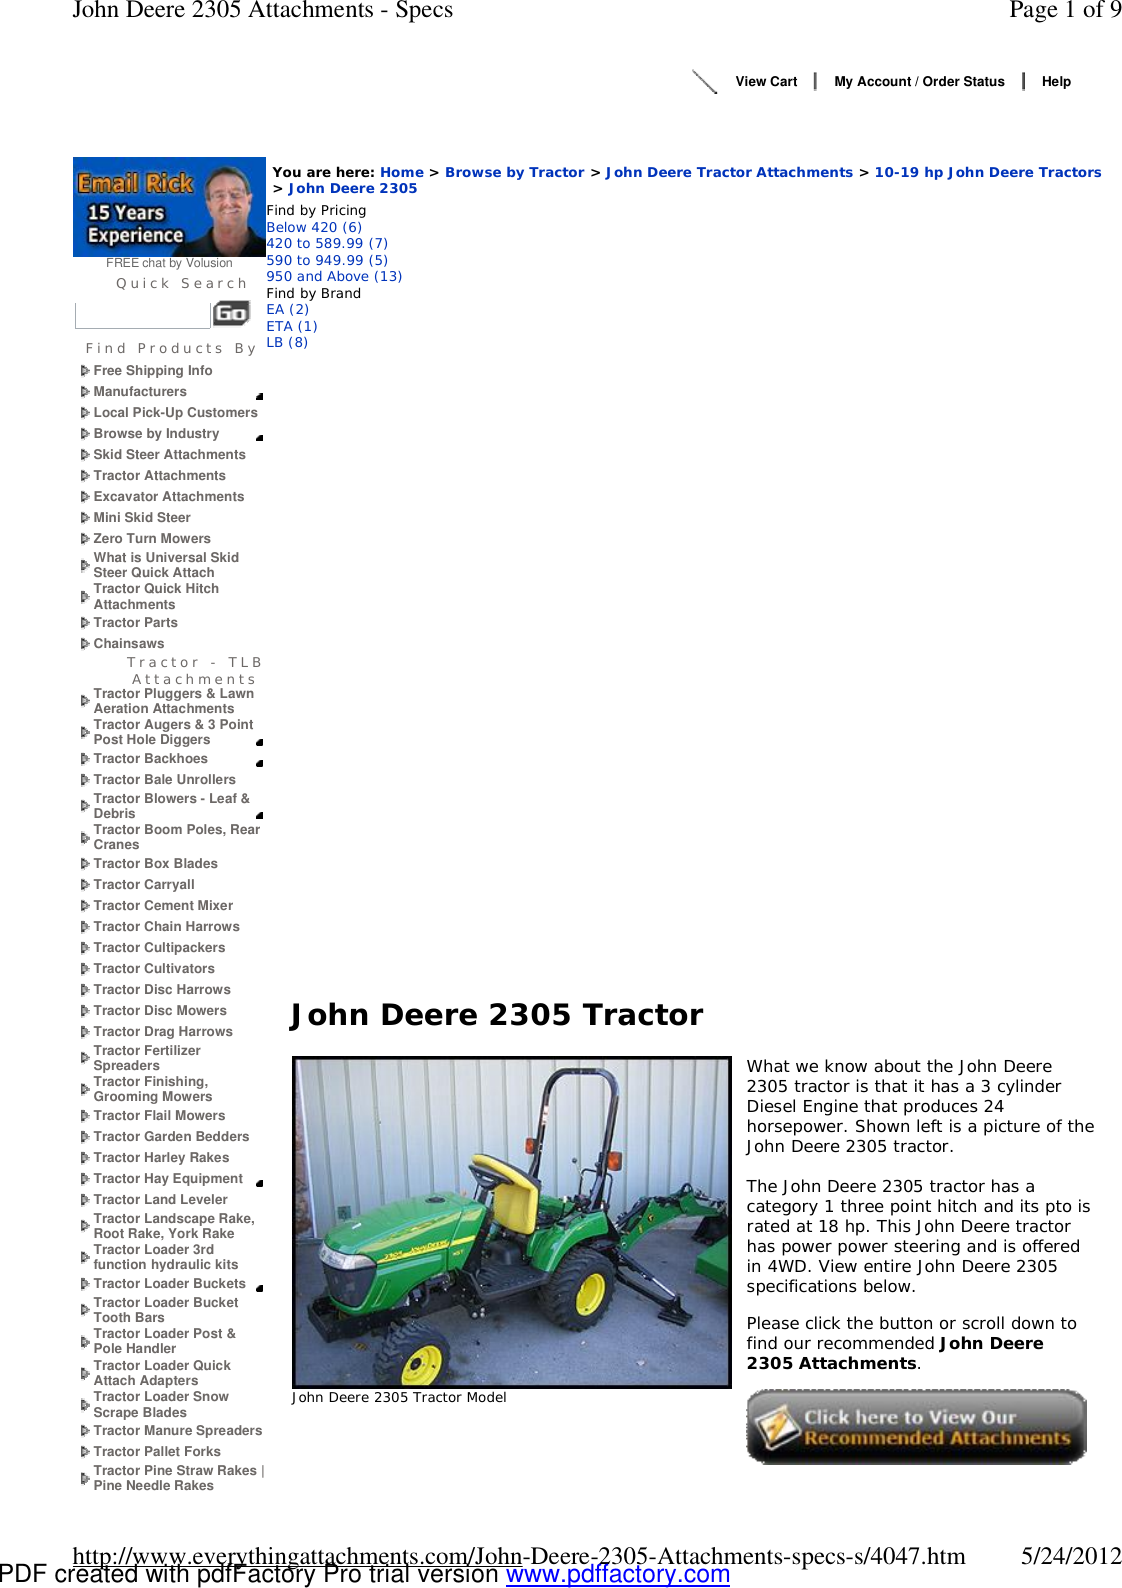 Page 1 of 9 - Www.everythingattachments.com/John-Deere-2305-Attachment  !! 115541 330812 Specs